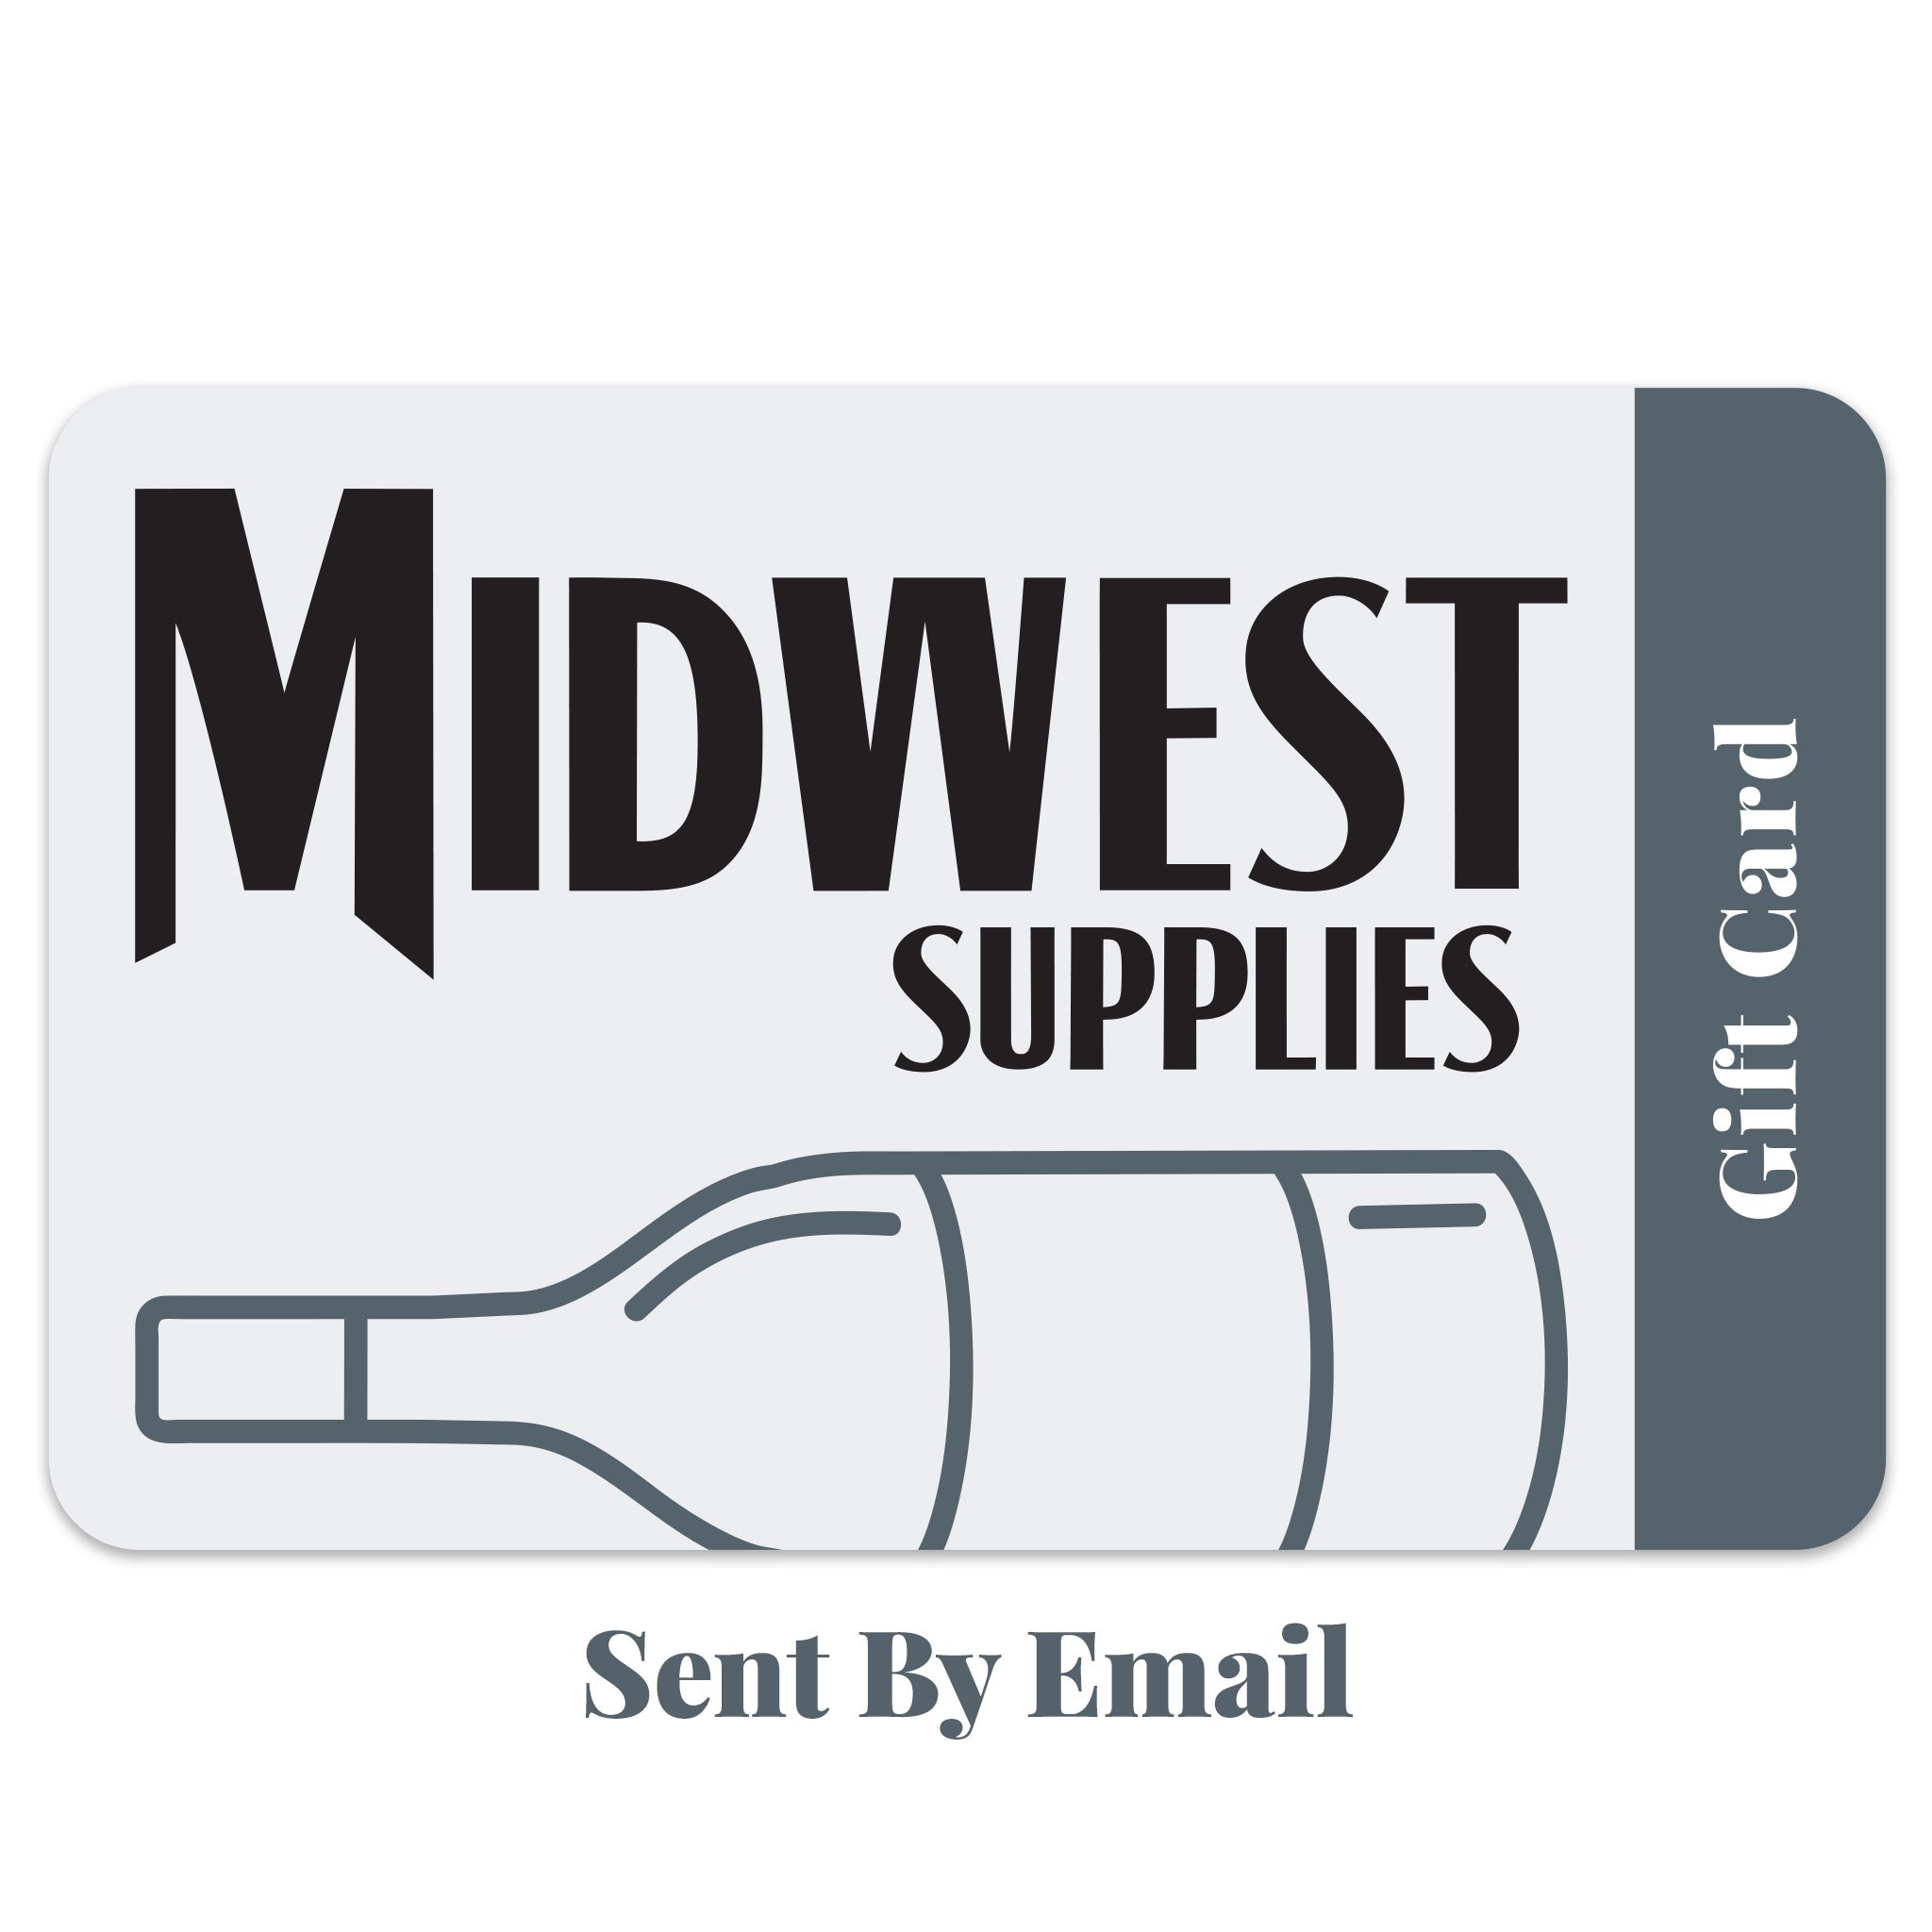 Image of Midwest Supplies Email Gift Card